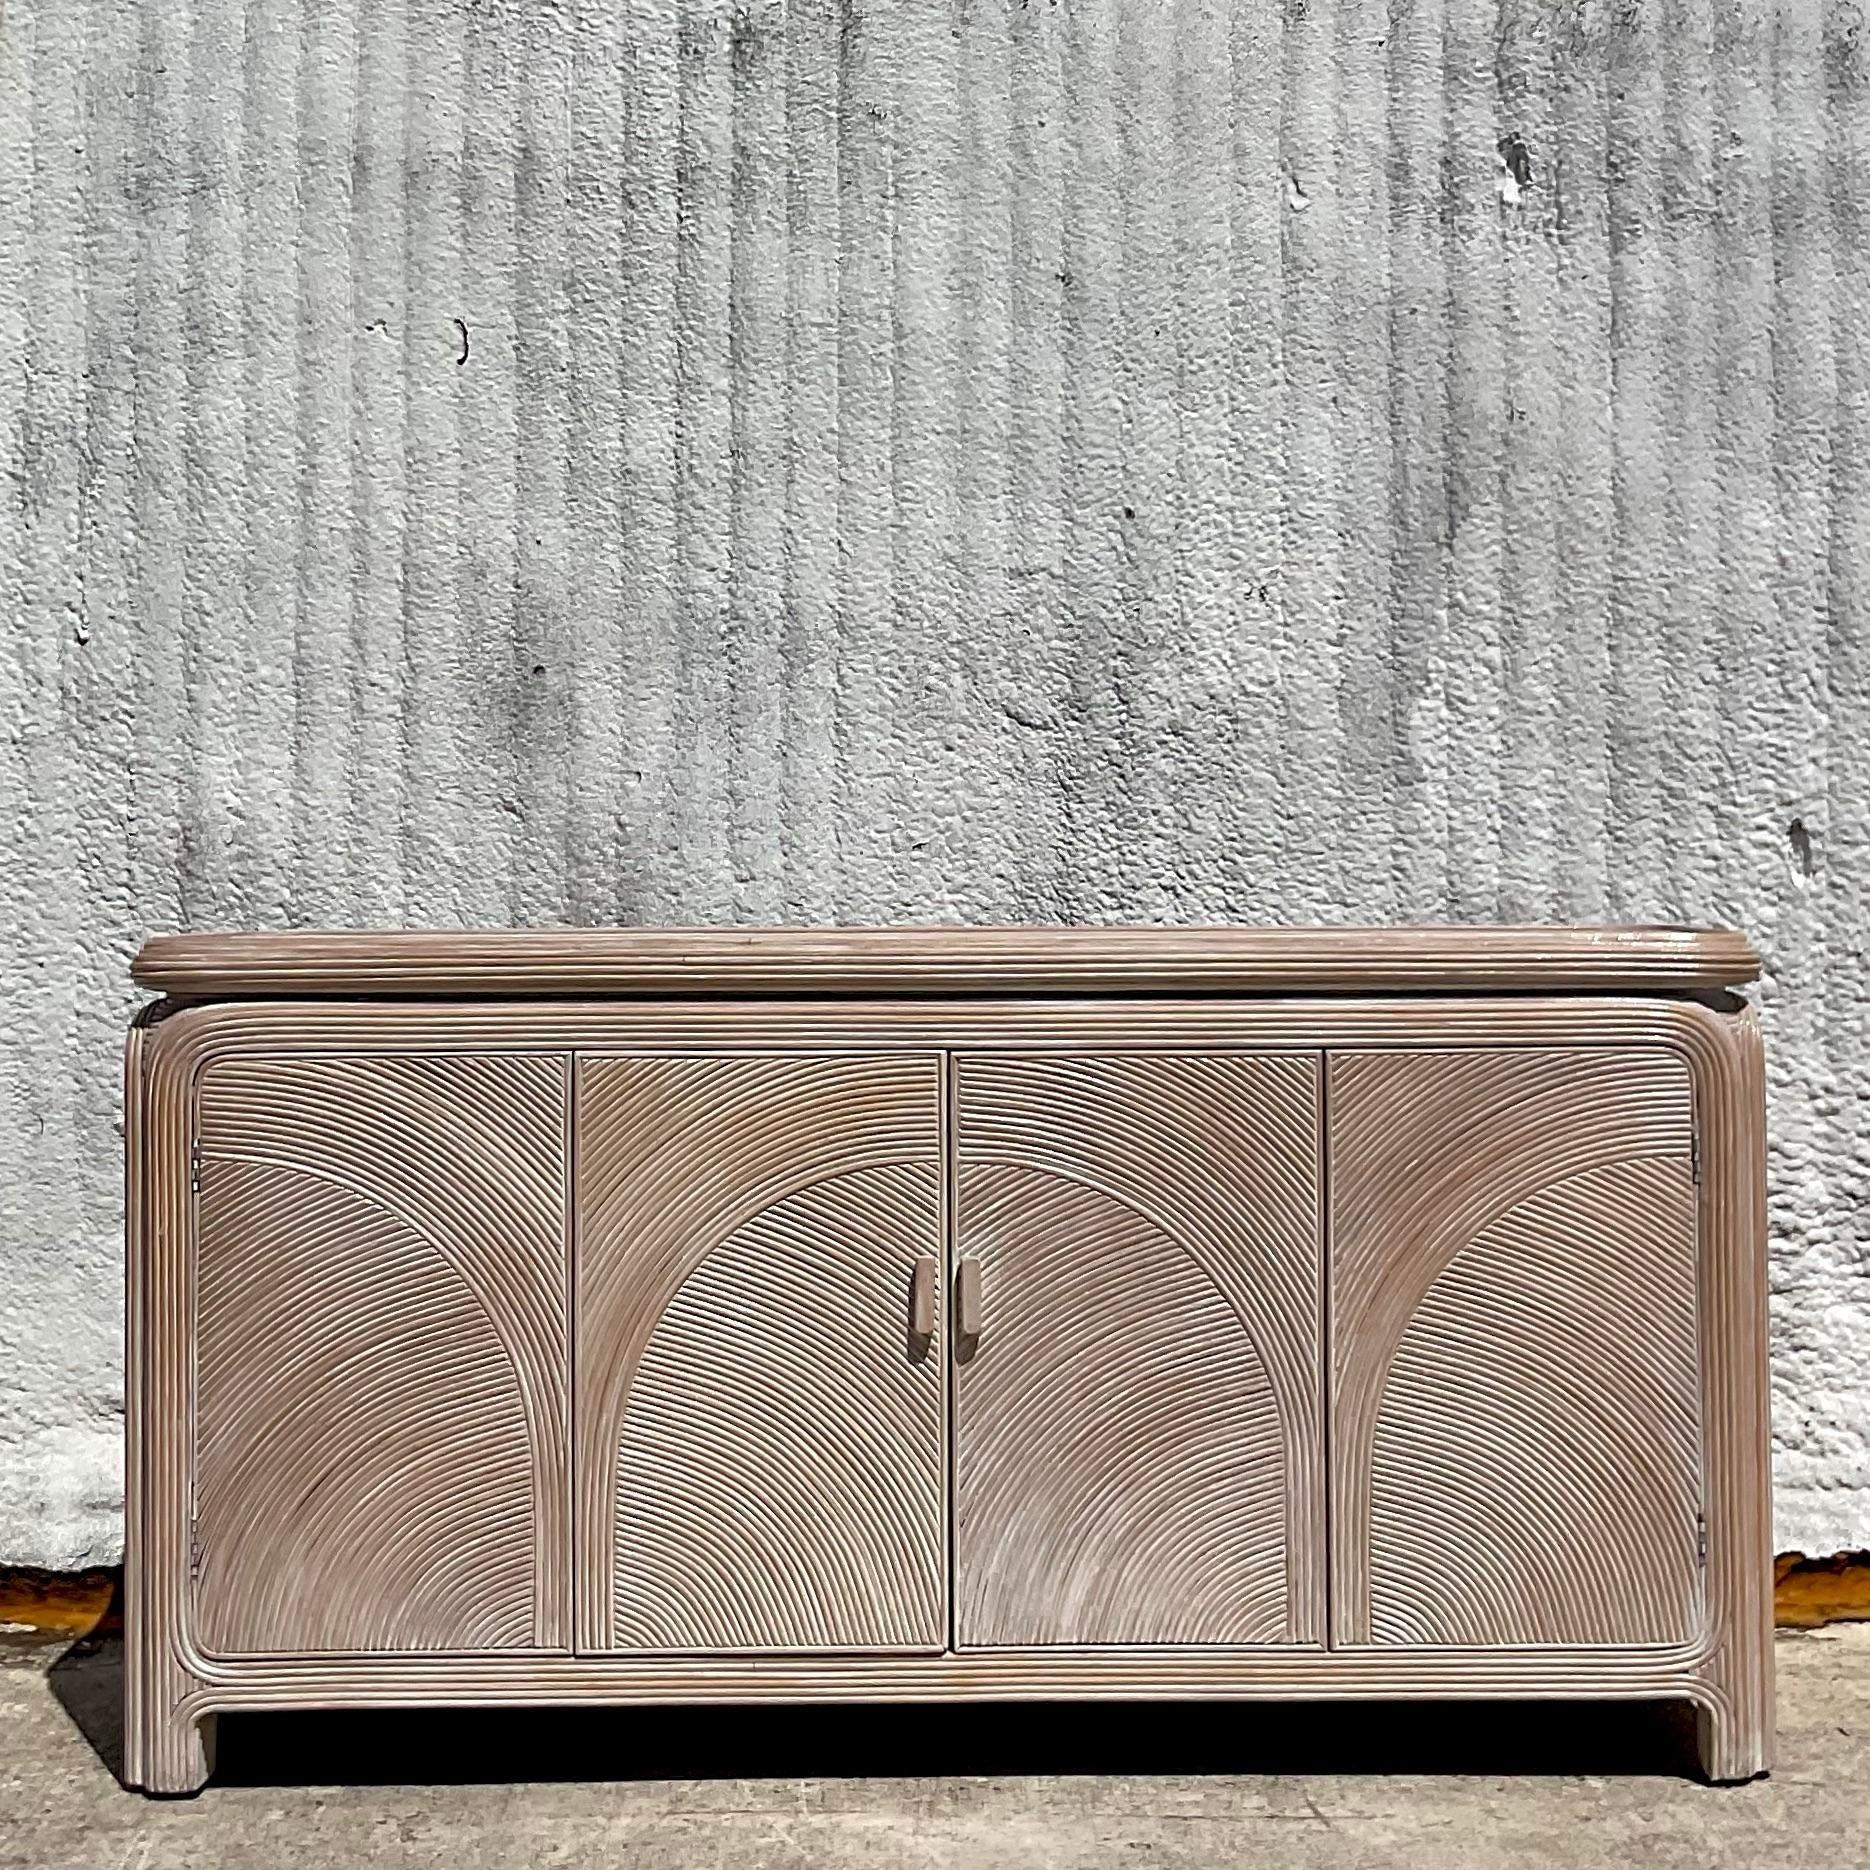 A fantastic vintage Costal credenza. A chic arched pencil reed frame with a gorgeous washed finish. Lots of great interior storage. Acquired from a Palm Beach estate